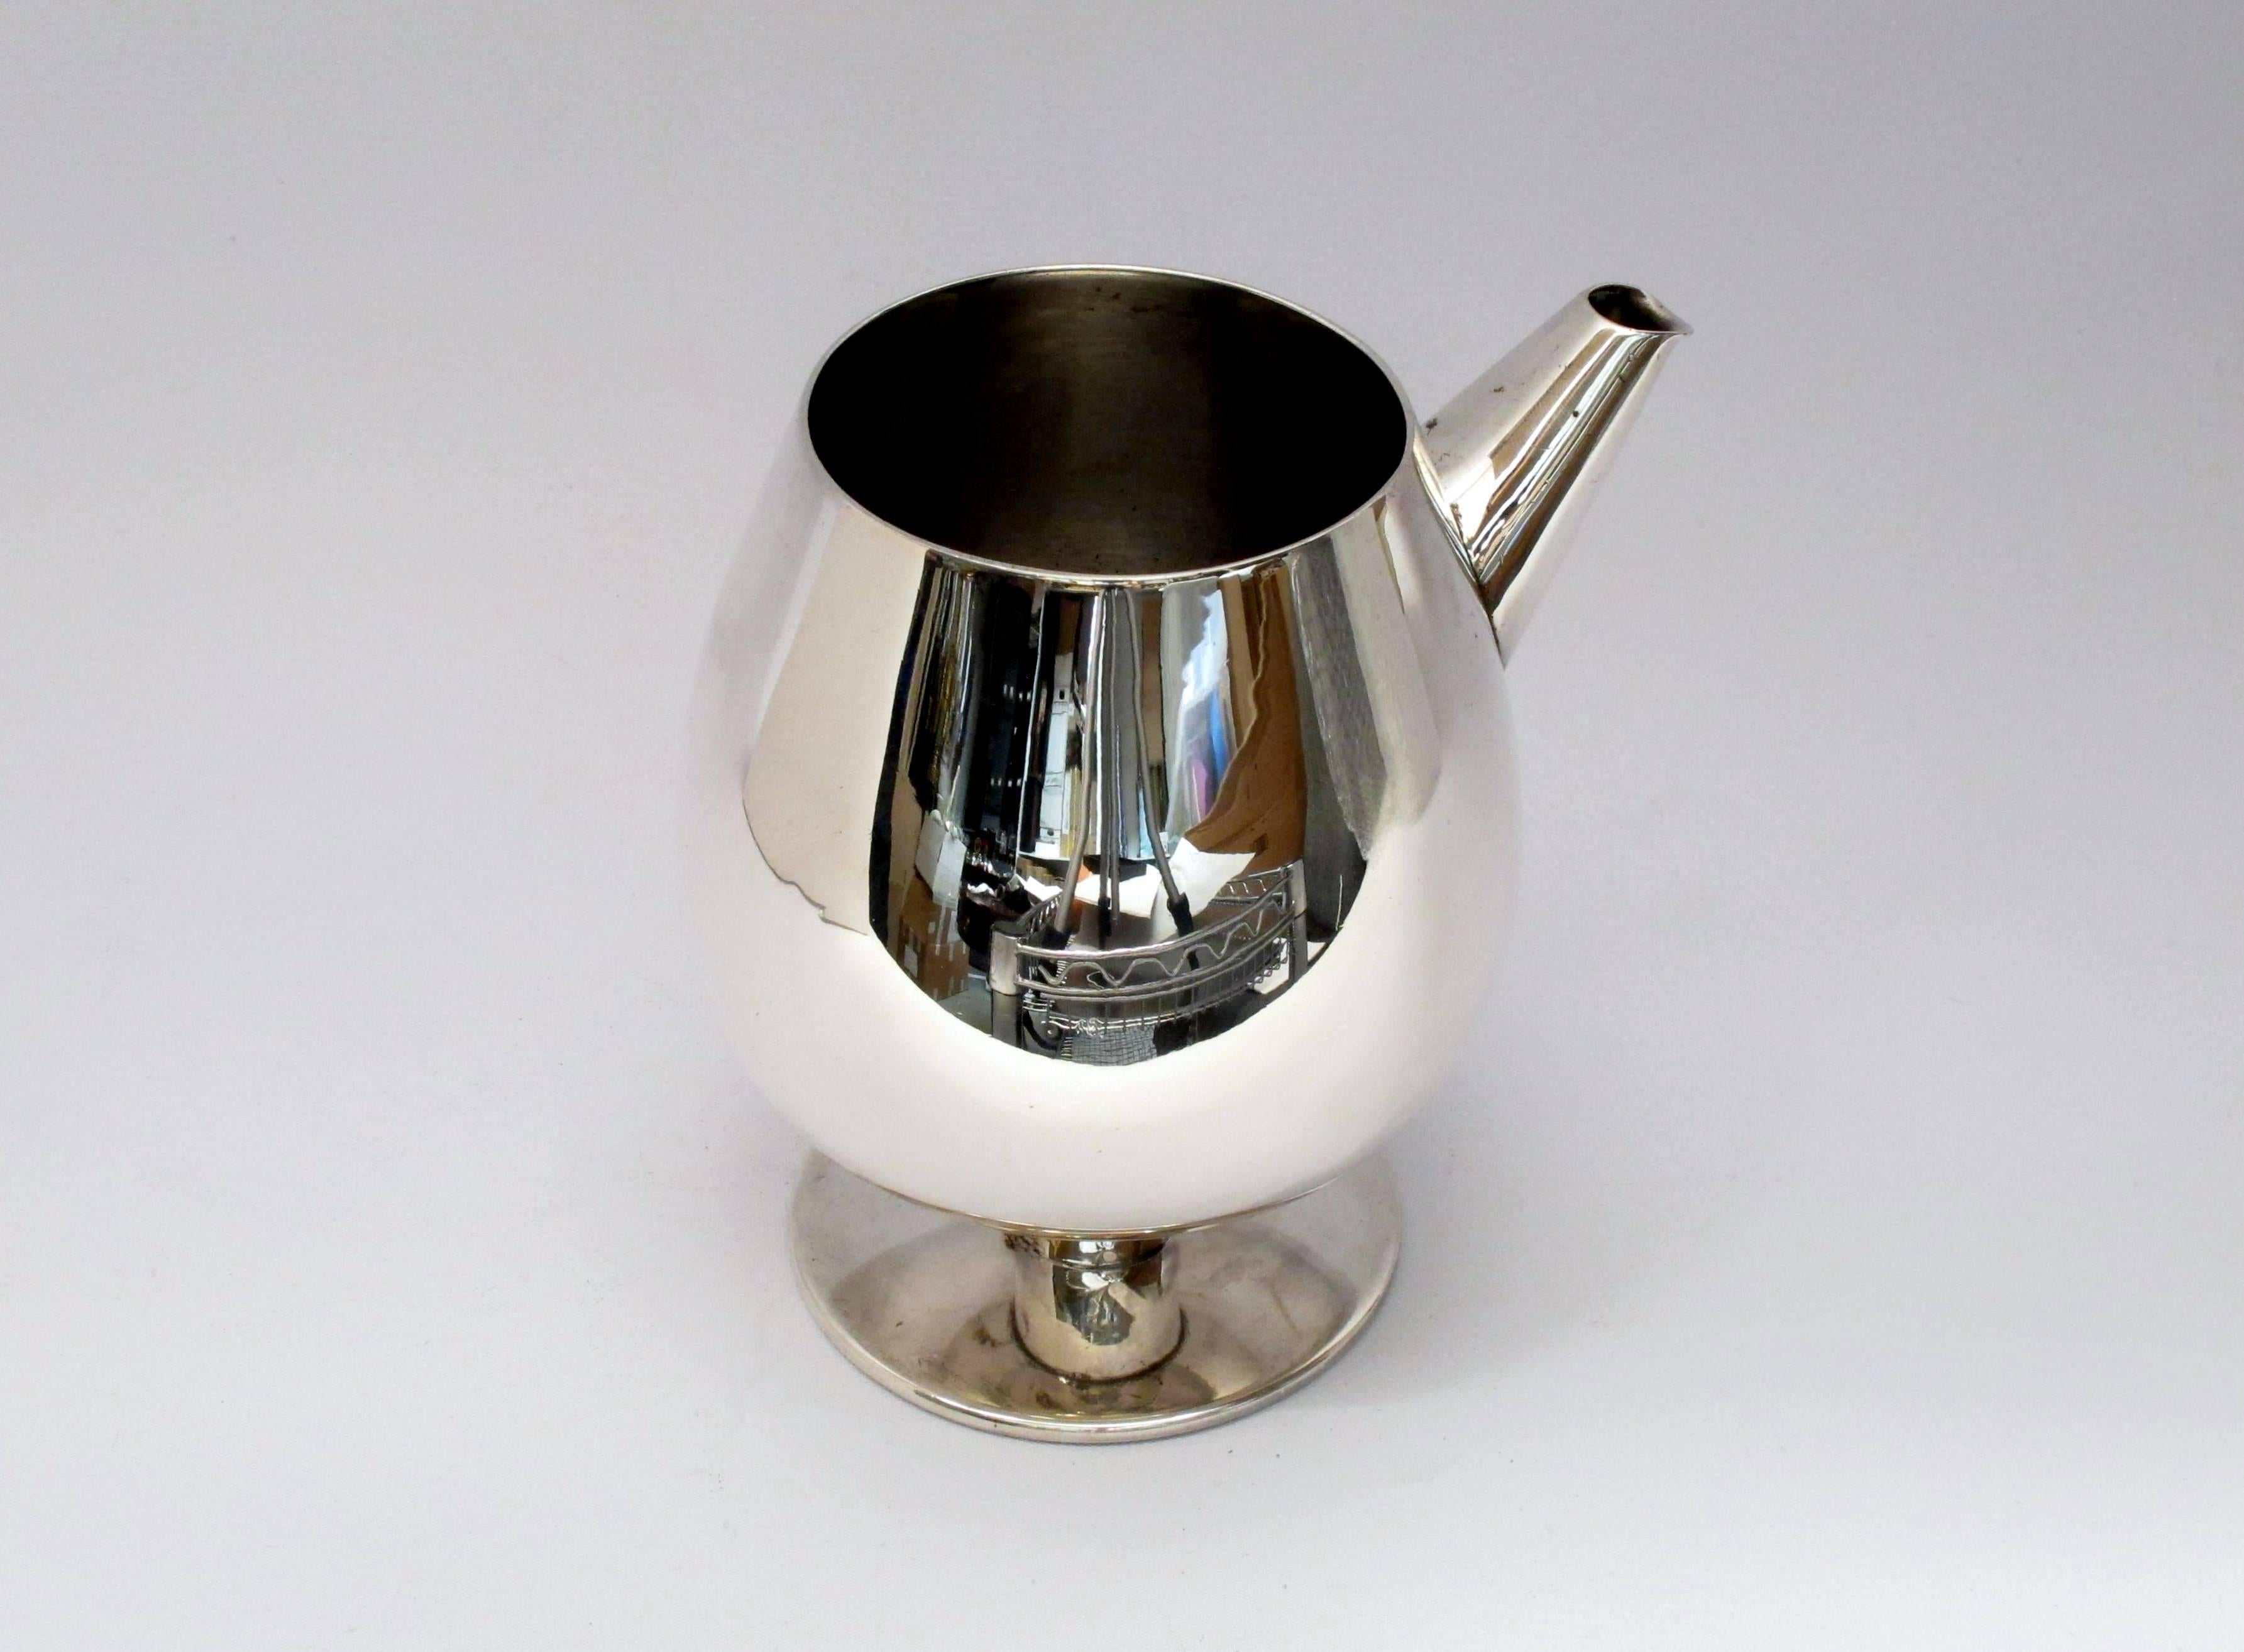 Stunning William Spratling cocktail mixer from 1964-67.
